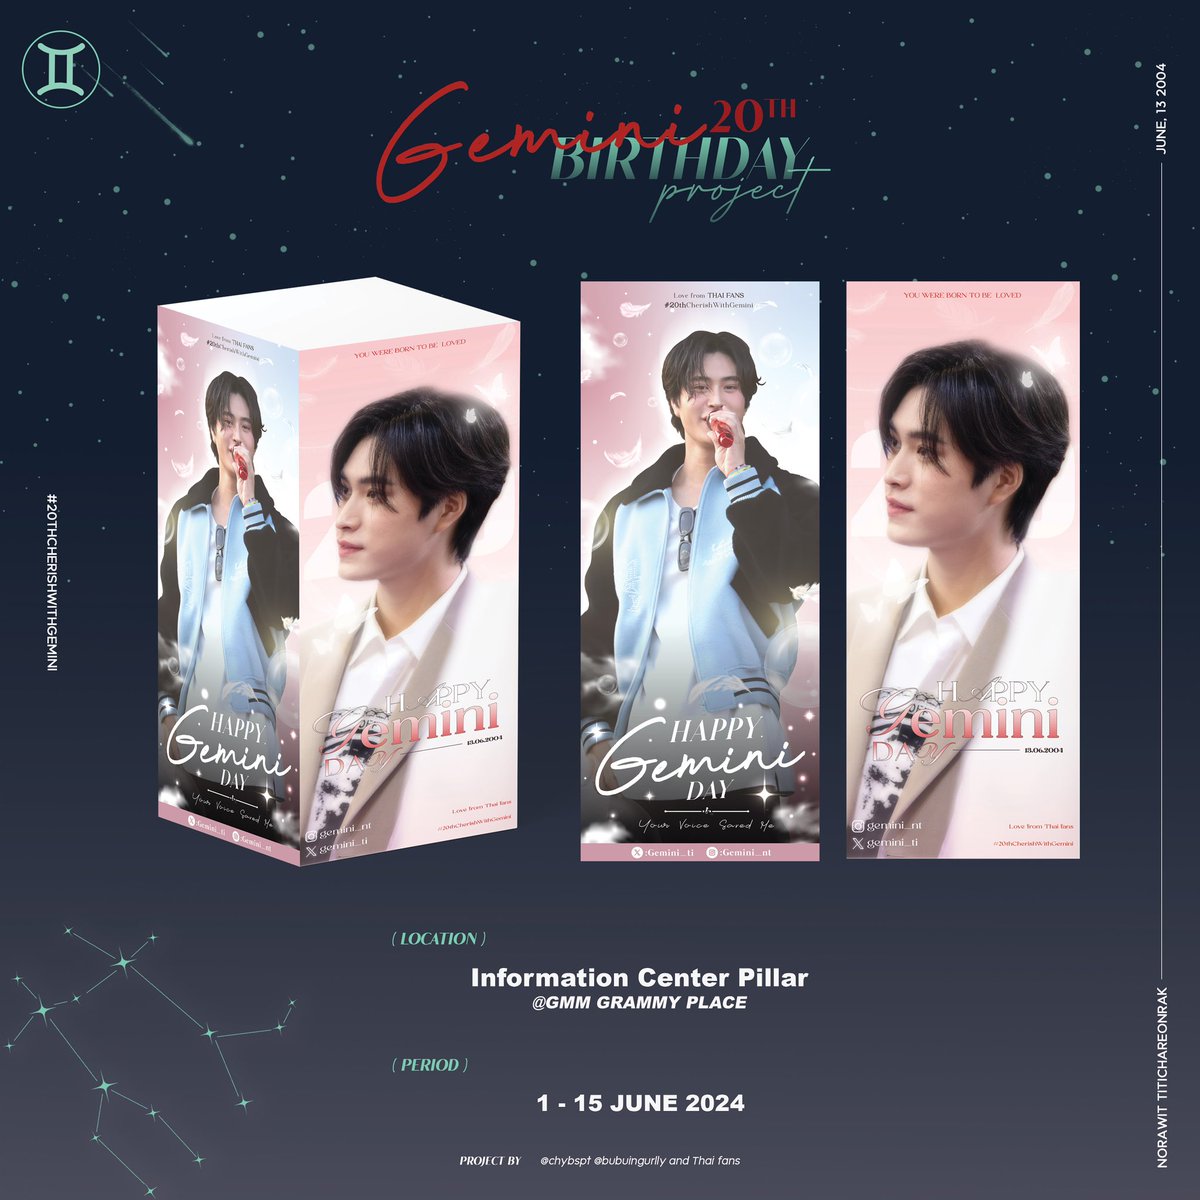 ✩₊˚⋆ No matter how many stars light up in the night, “𝑮𝒆𝒎𝒊𝒏𝒊” will always the brightest star in our sky. To celebrate Gemini’s 20th BD 📍 Gmm grammy place 🗓️ 01-15 June 2024 𐙚 Project by @chybspt @bubuingurlly and Thai fans #20thCherishWithGemini #Gemini_NT #เจมีไนน์